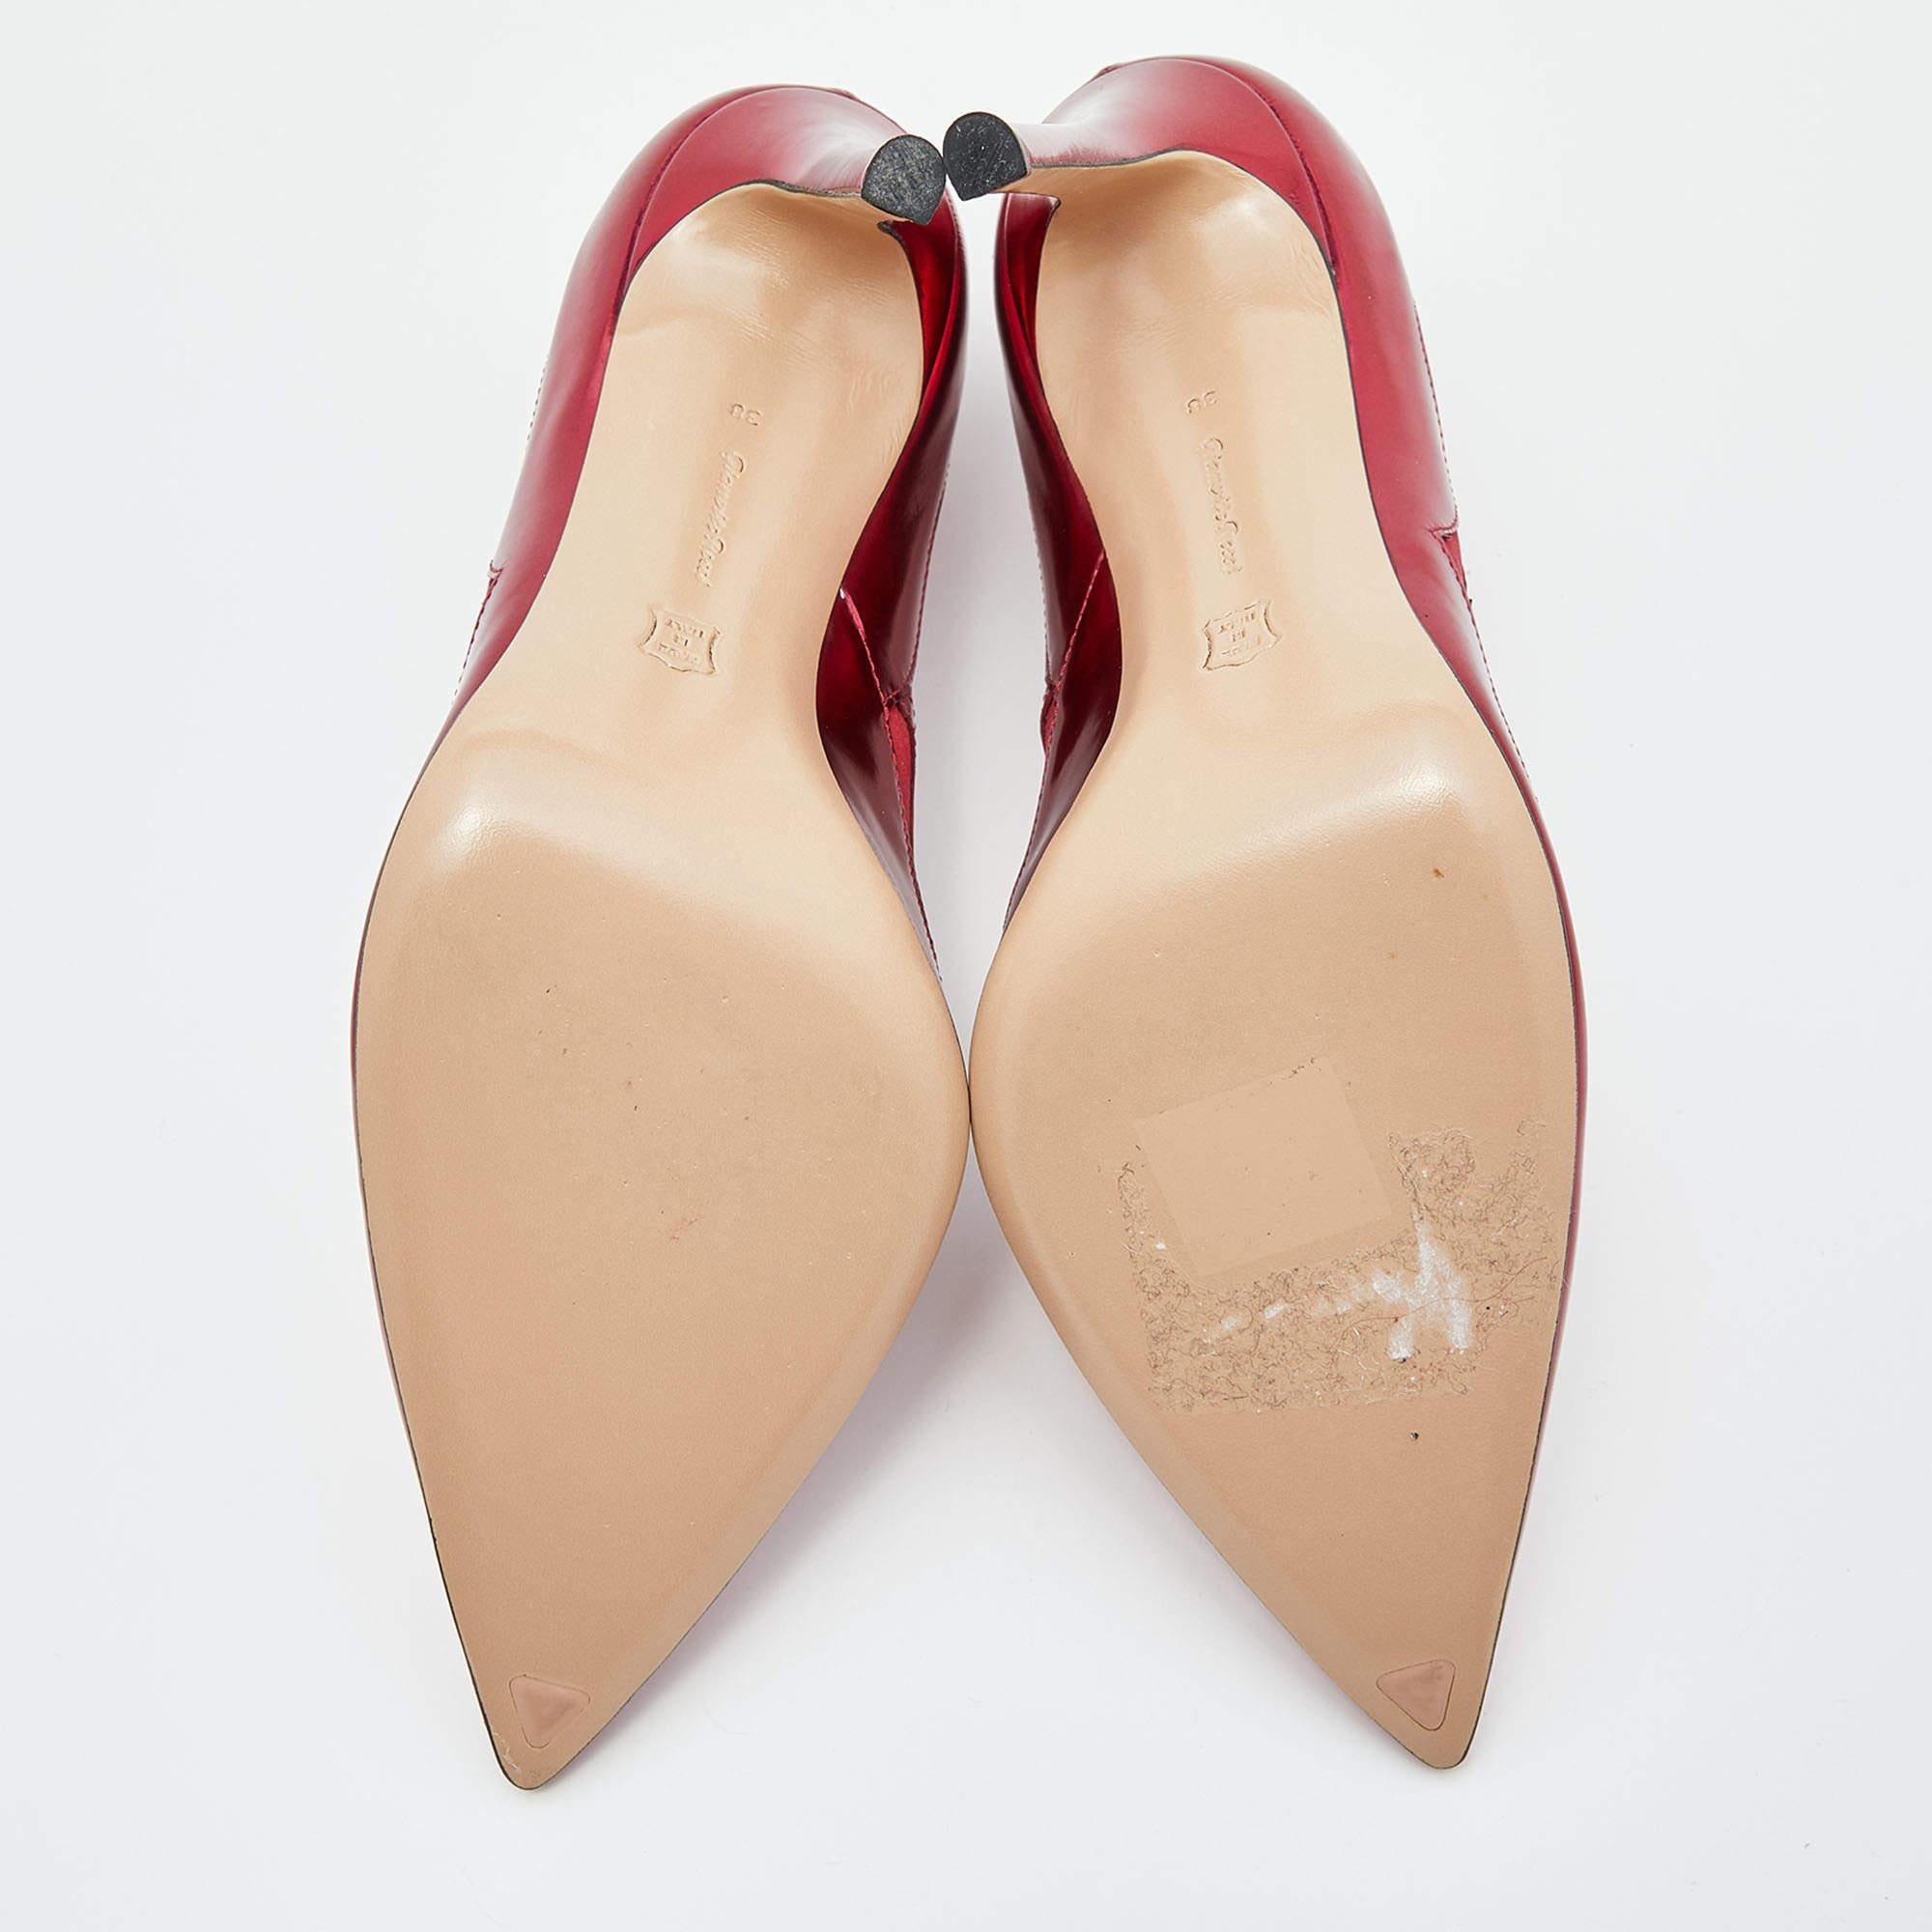 Gianvito Rossi Burgundy Laser Cut Leather and Satin Pointed Toe Pumps Size 38 4